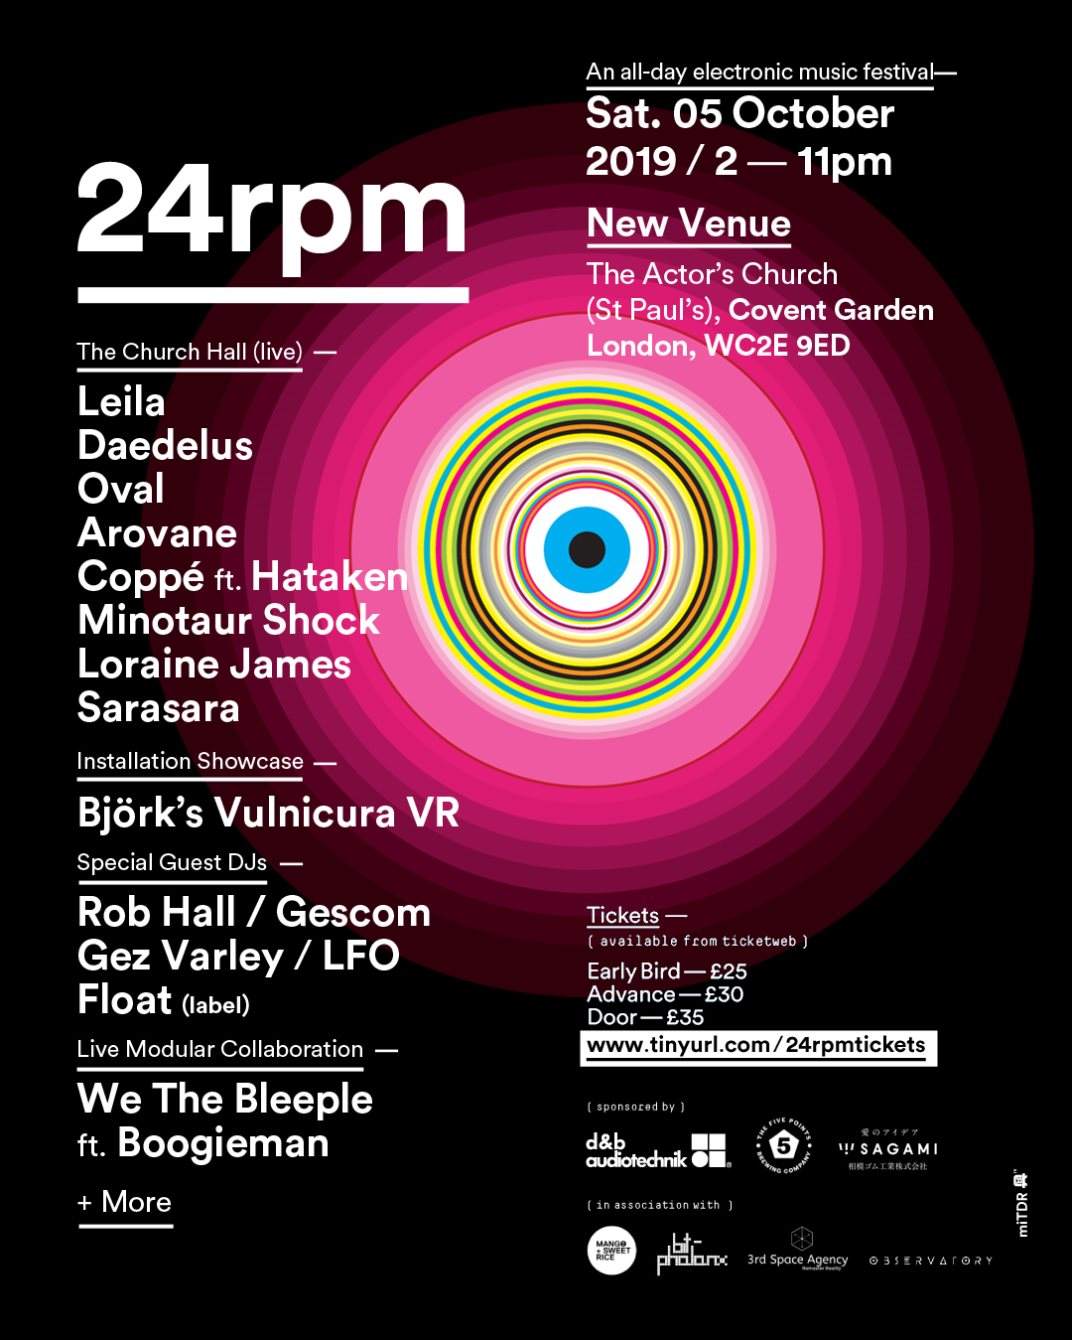 24rpm: An All-Day Electronic Music Festival - フライヤー表